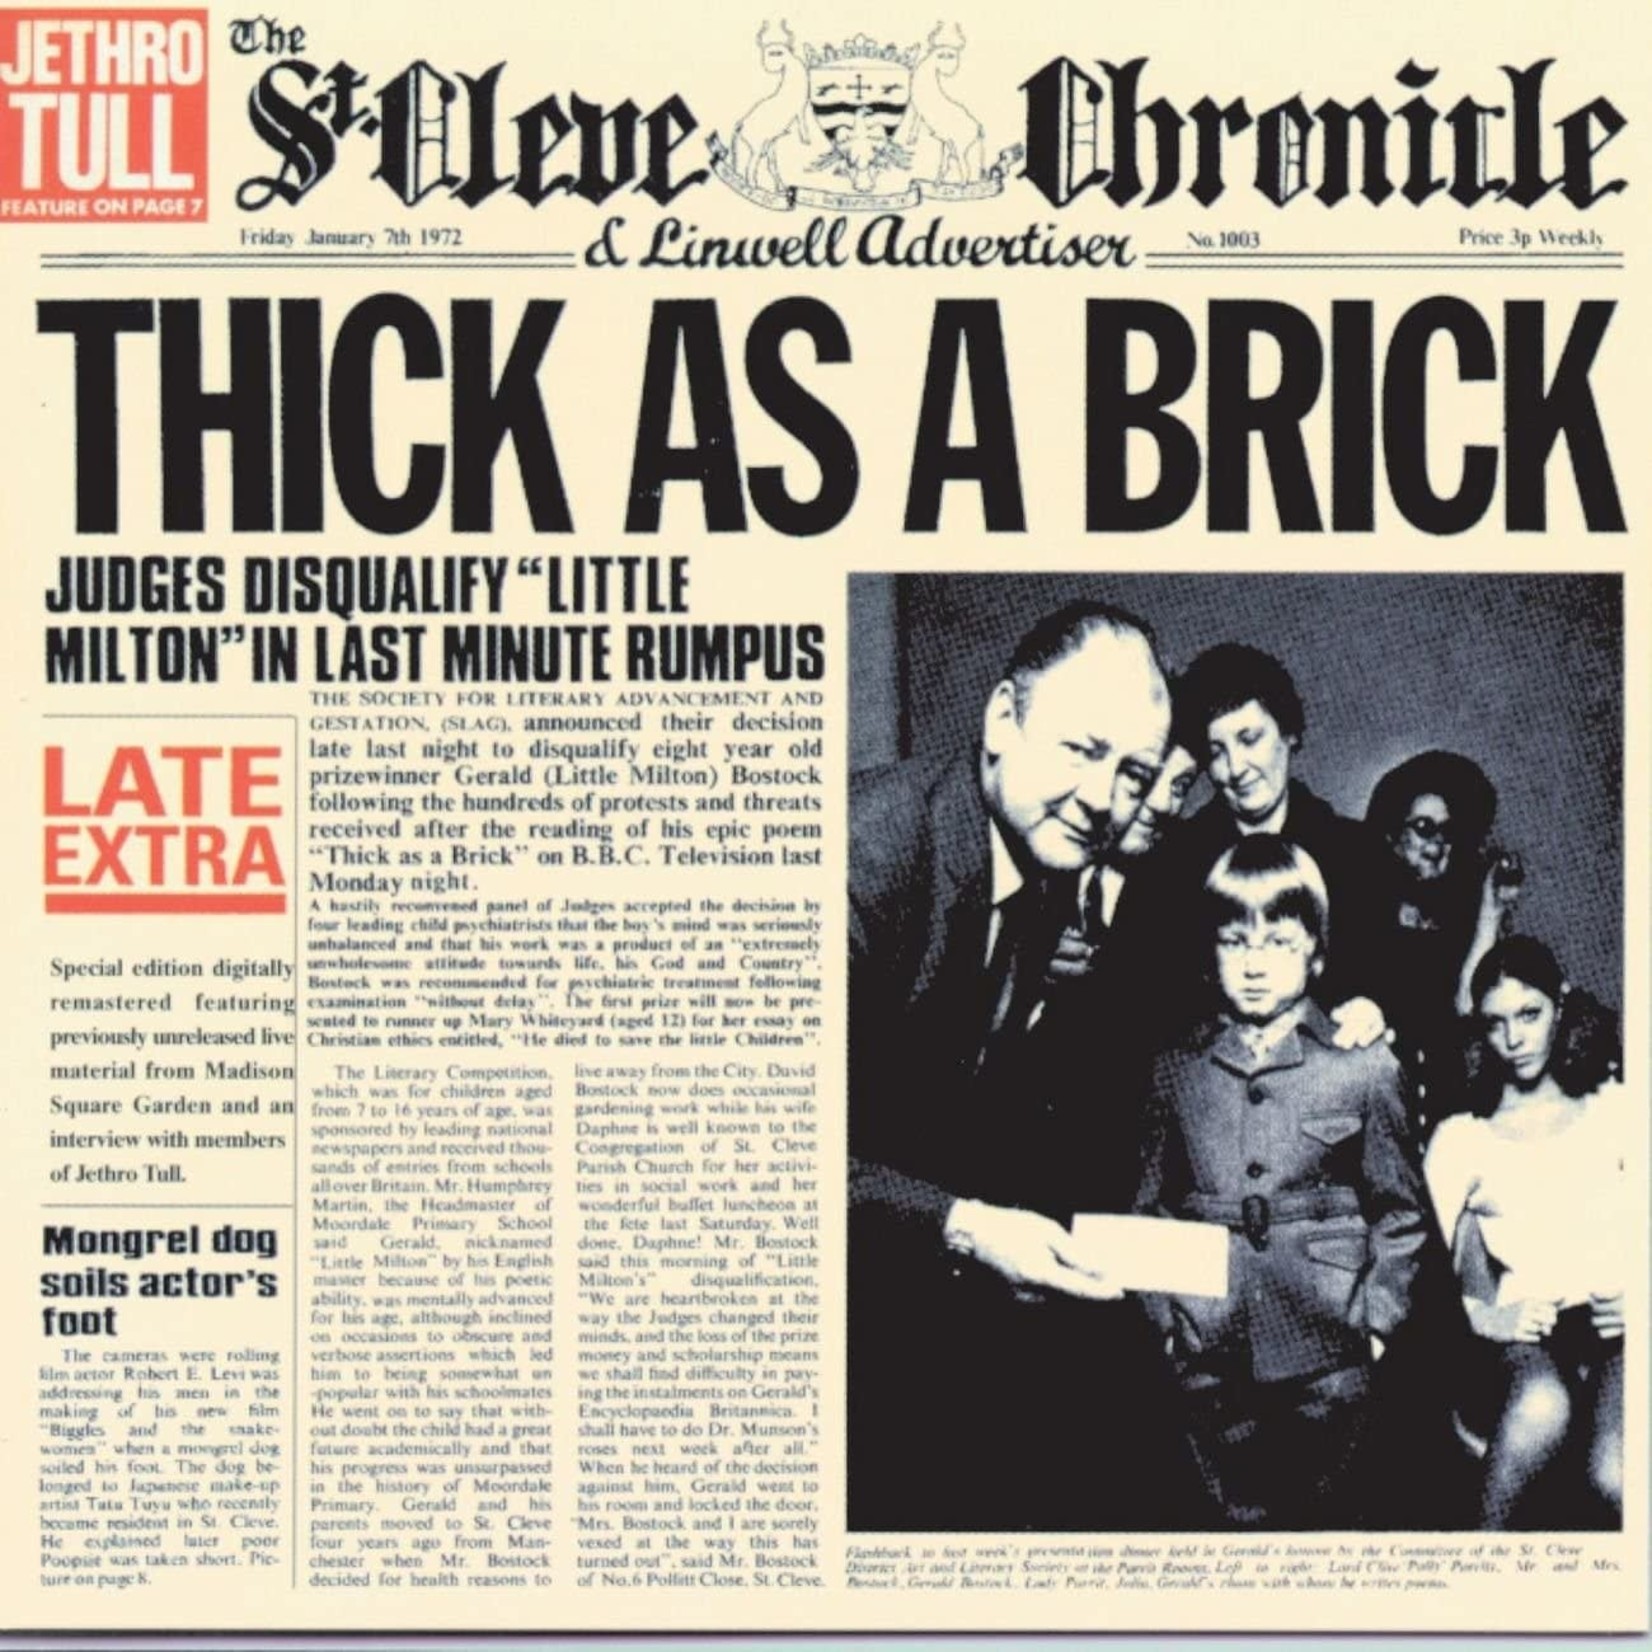 [Vintage] Jethro Tull - Thick As a Brick (without paper)